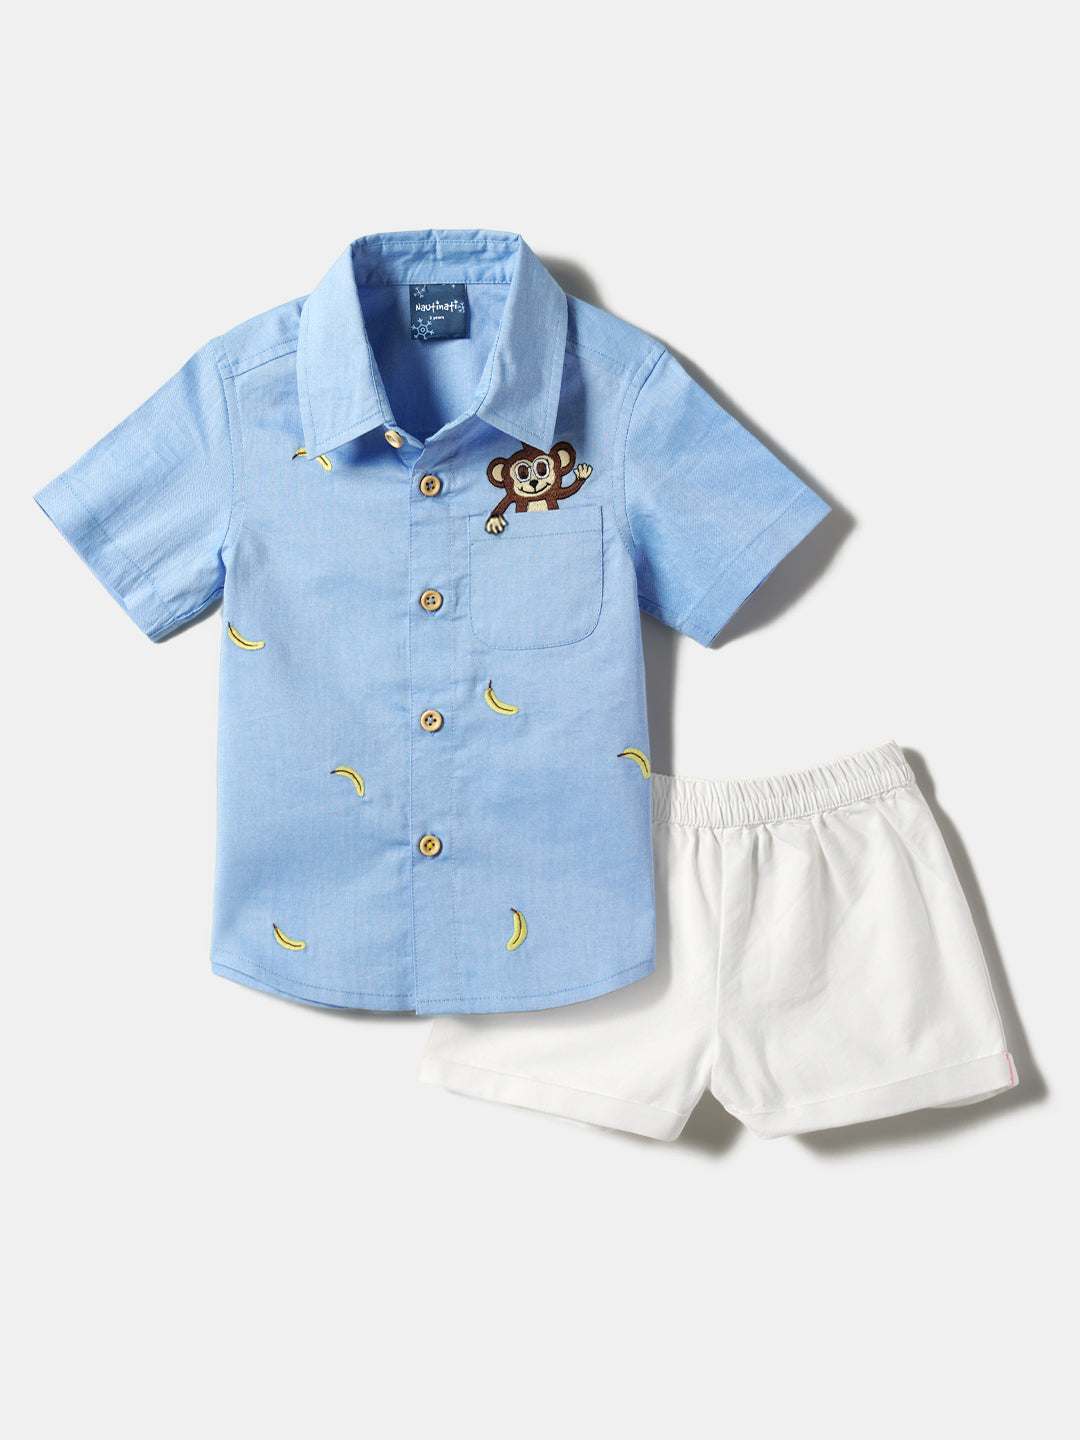 Boys Blue-White Embroidered Half Sleeves Collar-Neck Casual Shirt With Shorts